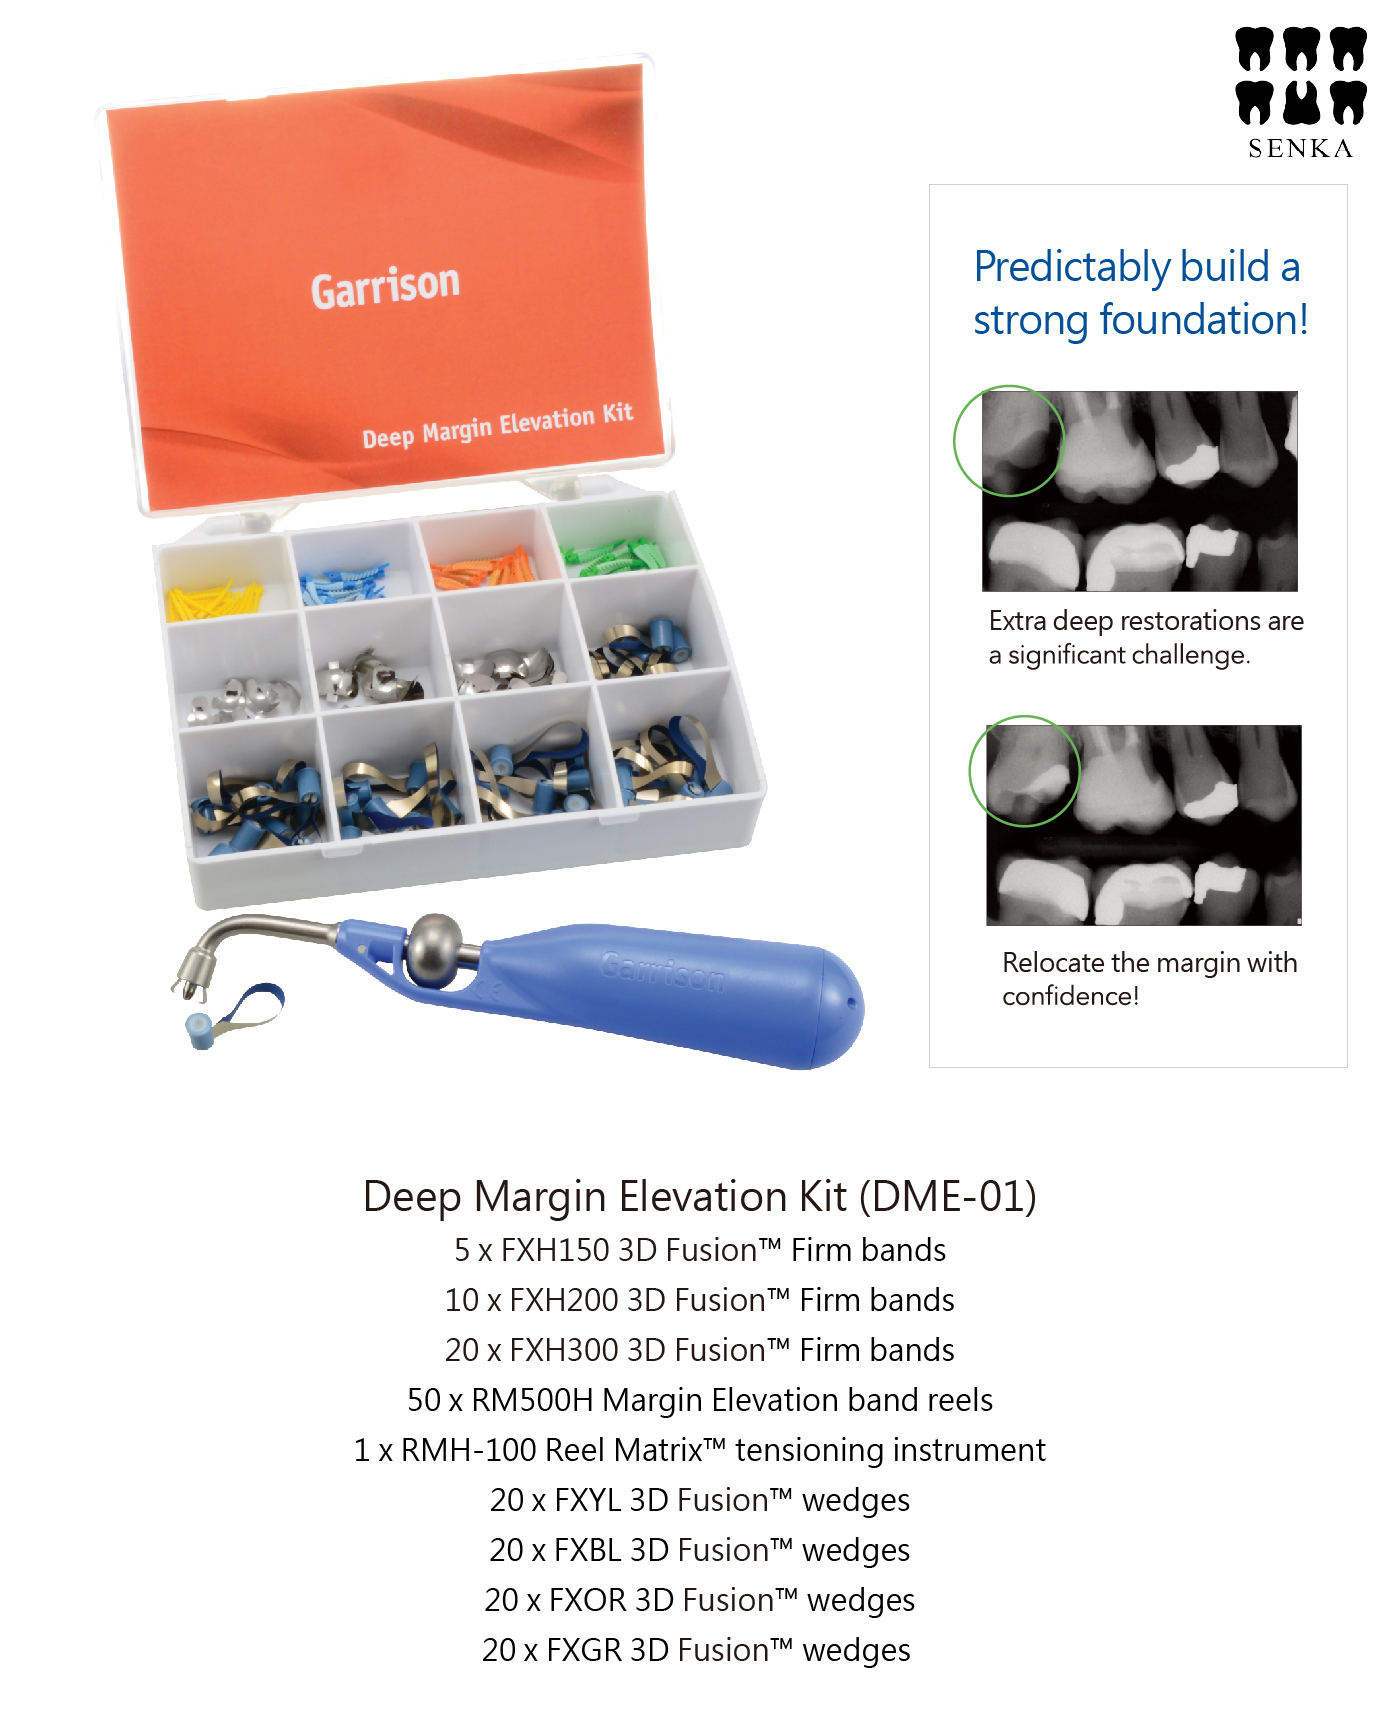 GA1-DME-01 - Deep Margin Elevation Kit with Firm Bands Band Reels & Wedges  - Henry Schein Australian dental products, supplies and equipment